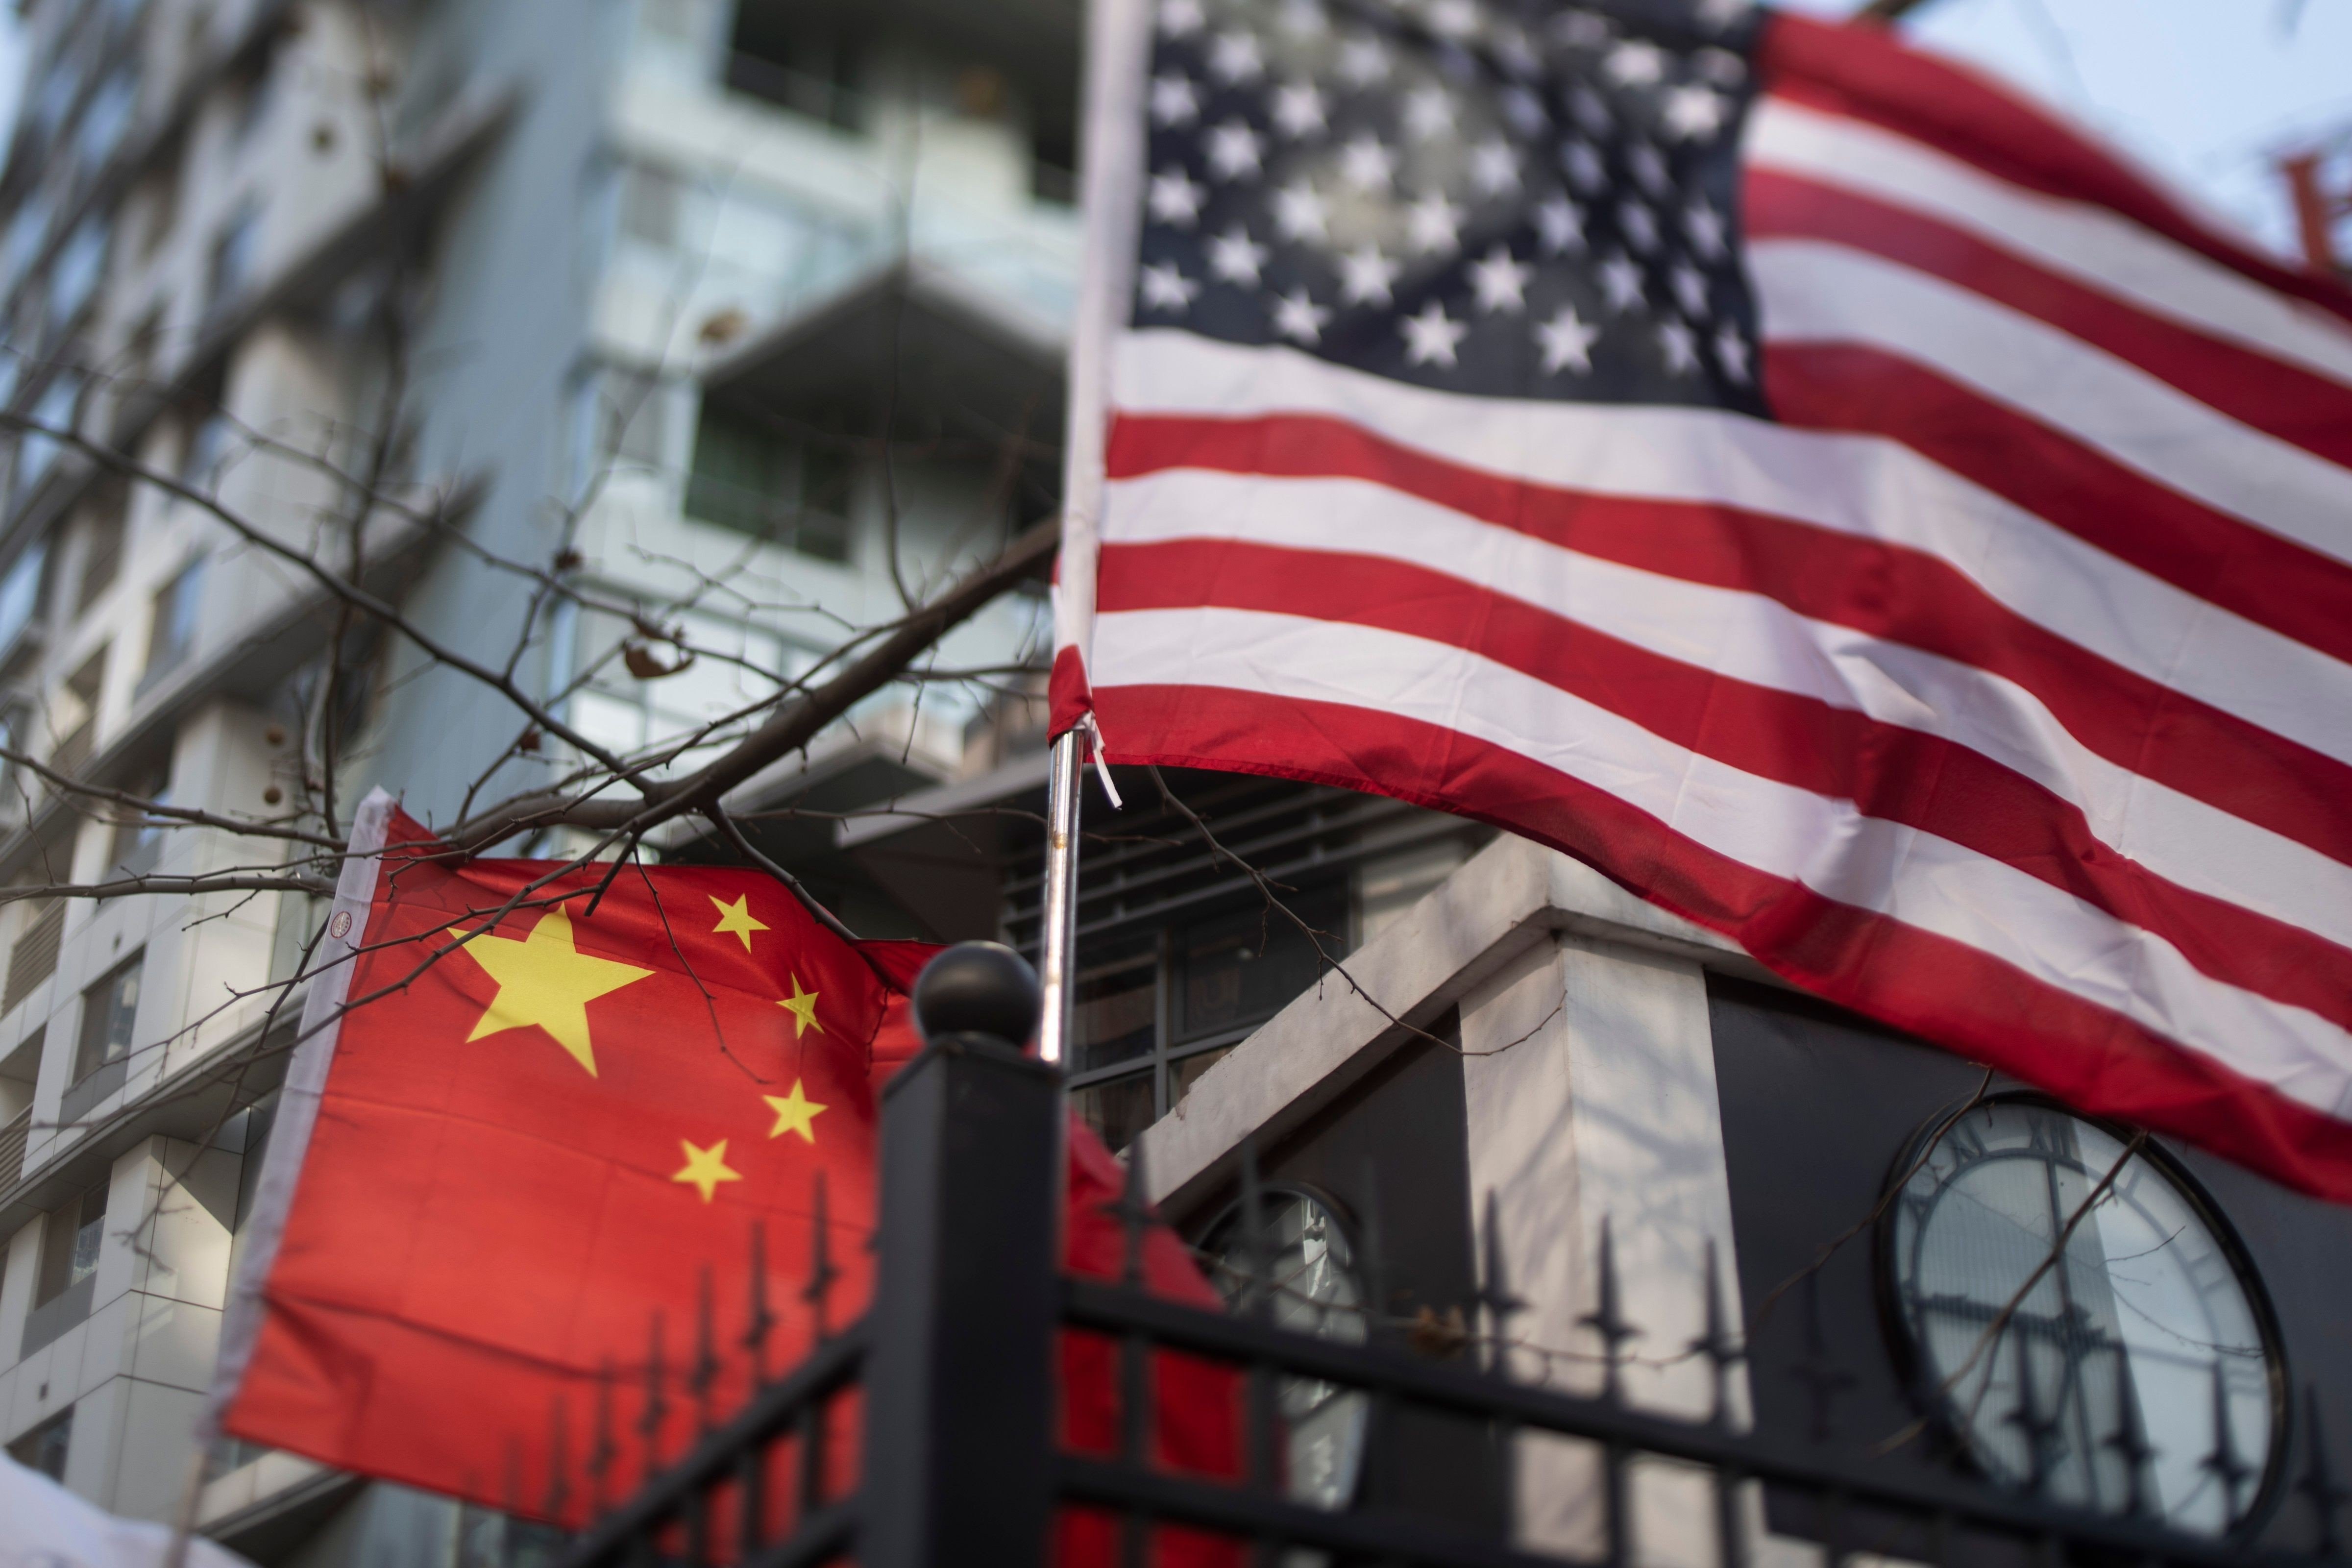 Chinese and US national flags at an international school in Beijing. US-China trade friction is hurting the outlook for American companies operating in China, according to the US-China Business Council member survey. Photo: AFP